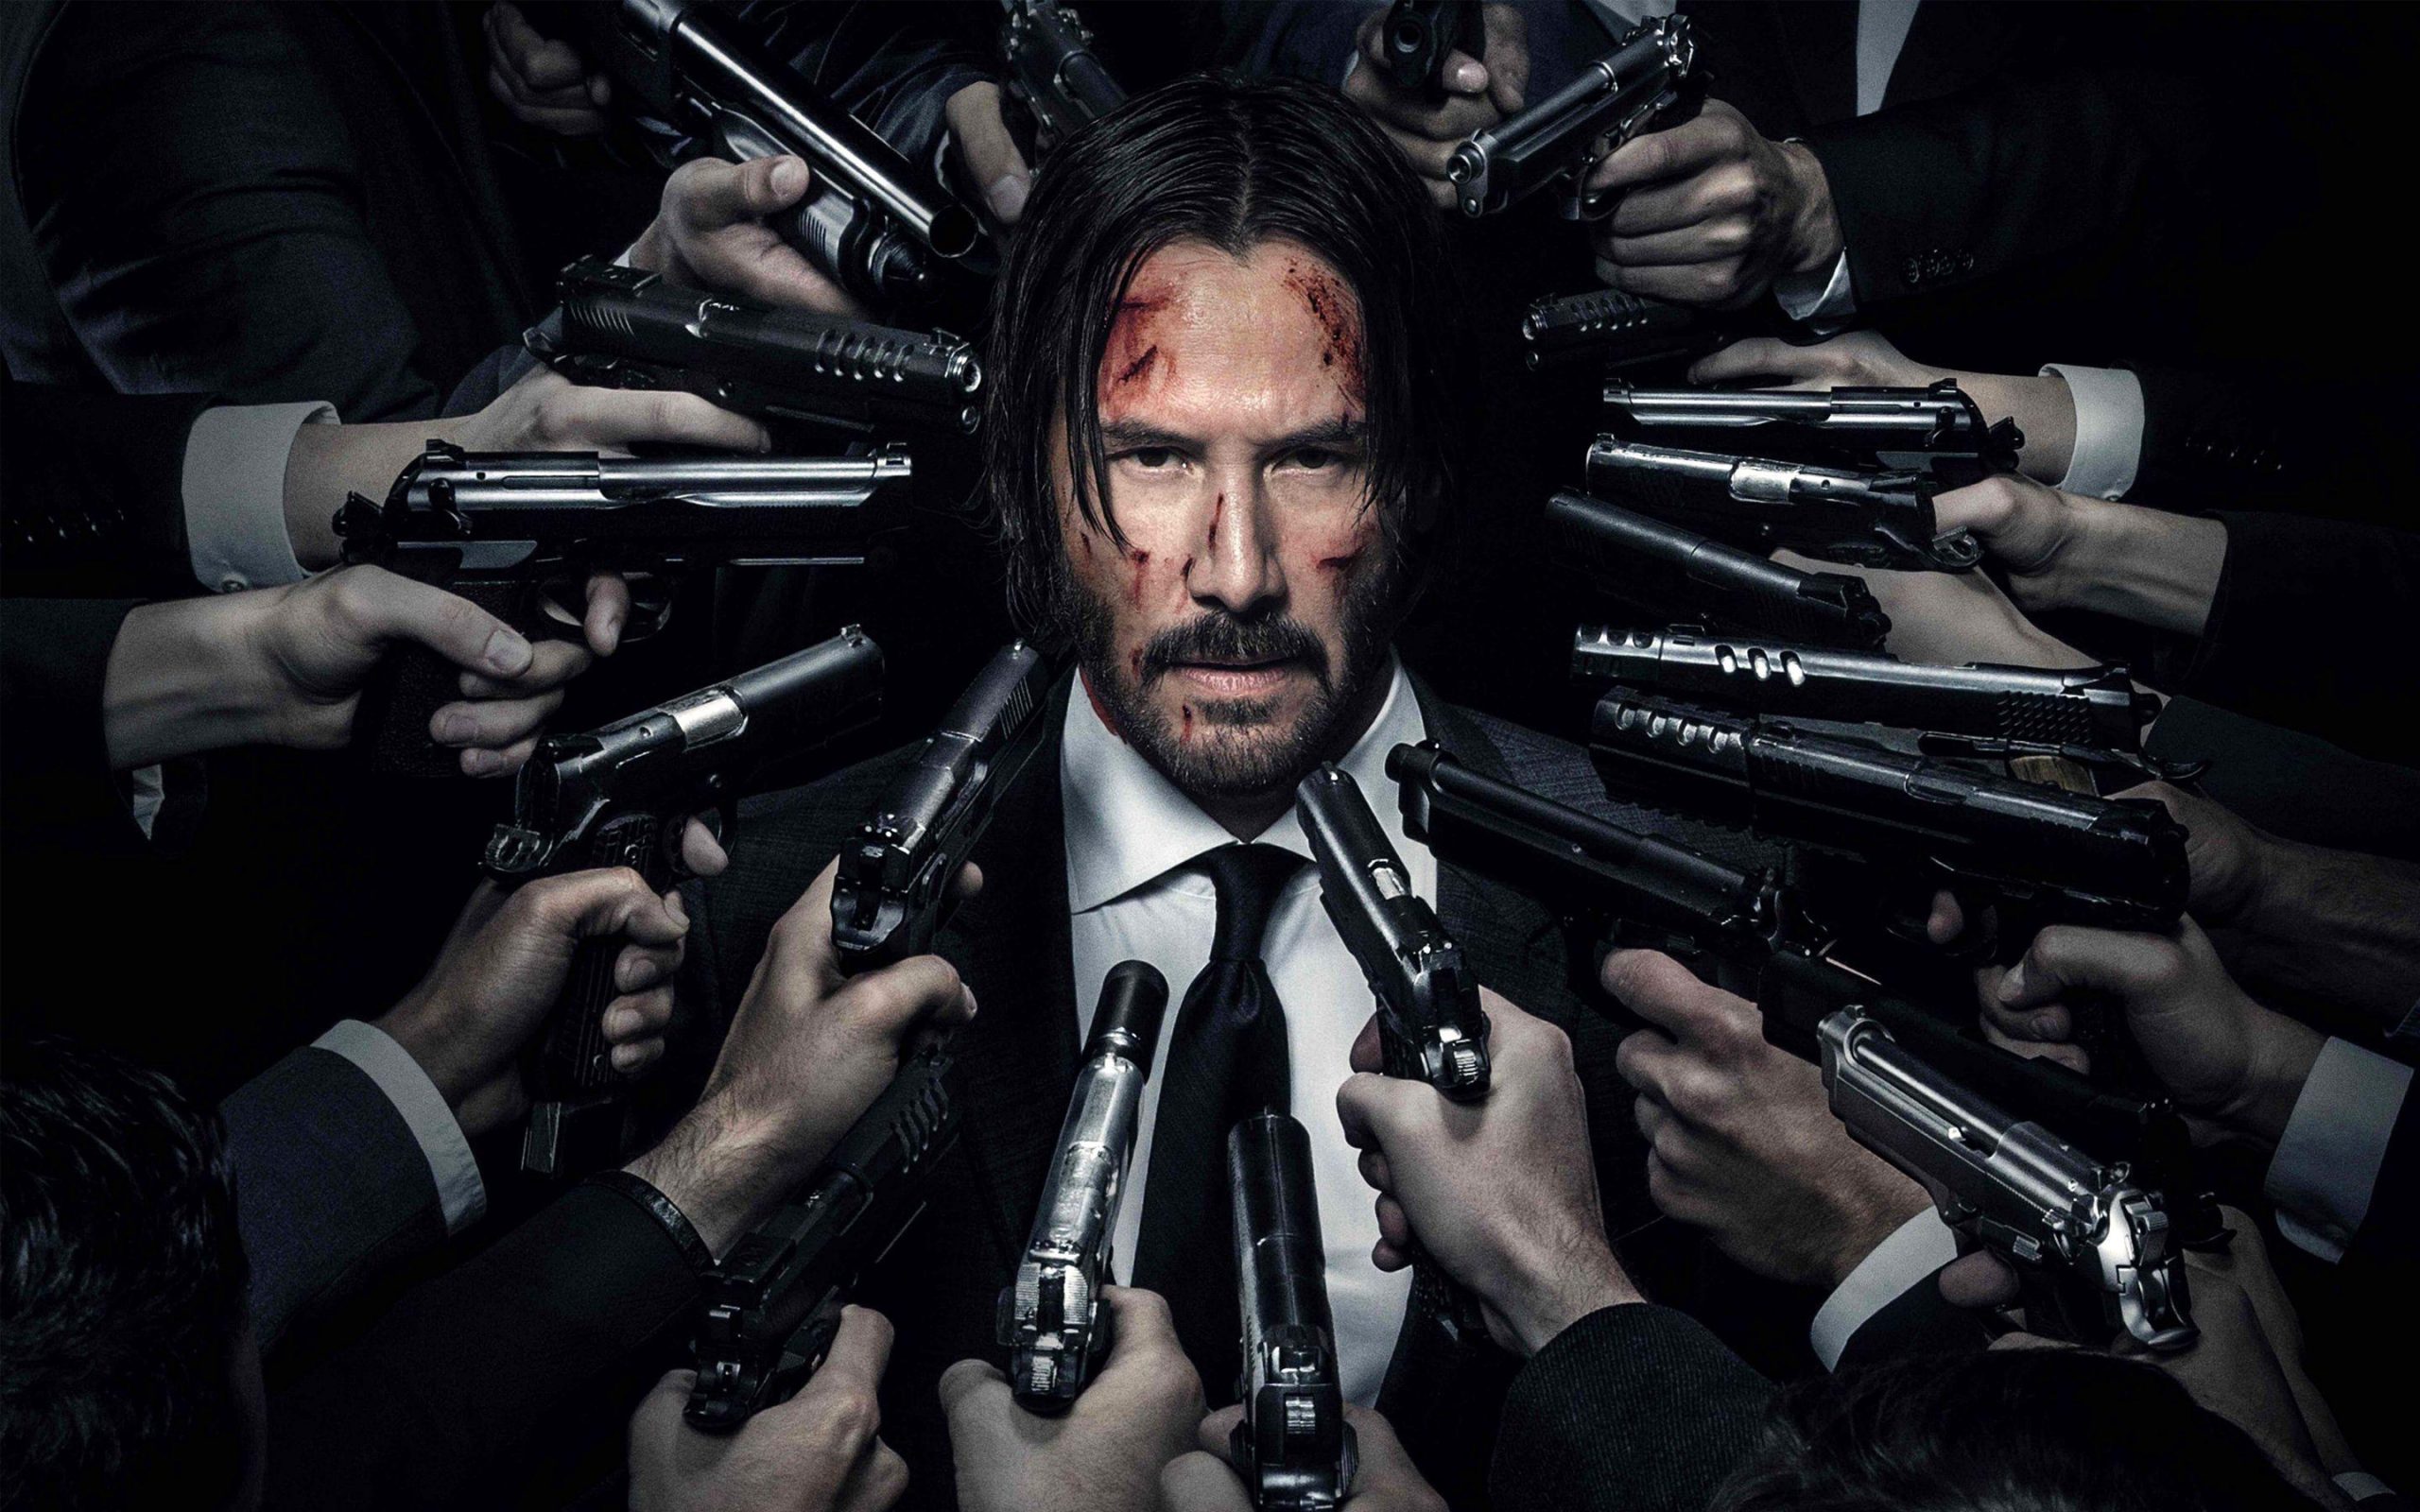 Do you know that about John Wick?